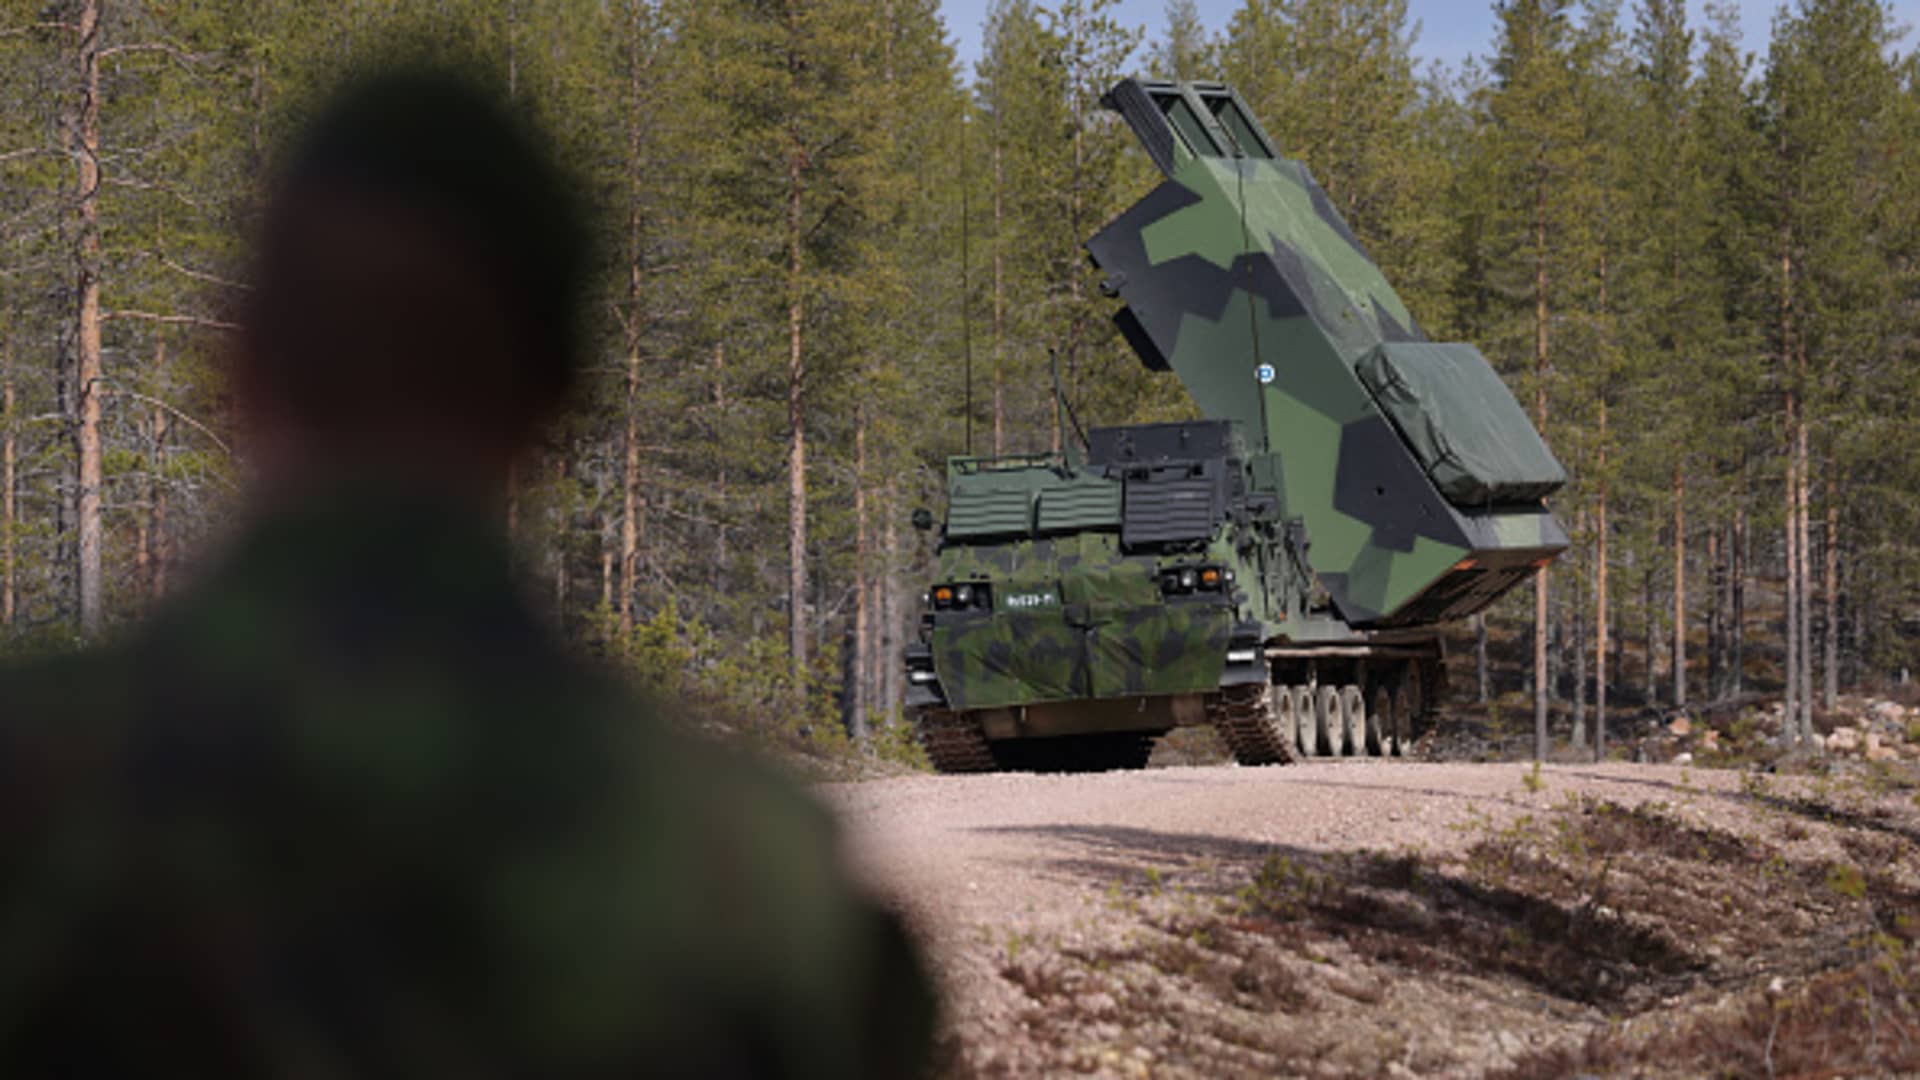 An M270 MLRS heavy rocket launcher on May 23, 2022. Britain is sending Ukraine multiple-launch rocket systems that can strike targets up to 50 miles away — in a coordinated response with the U.S. to Russia's invasion, Reuters reported.